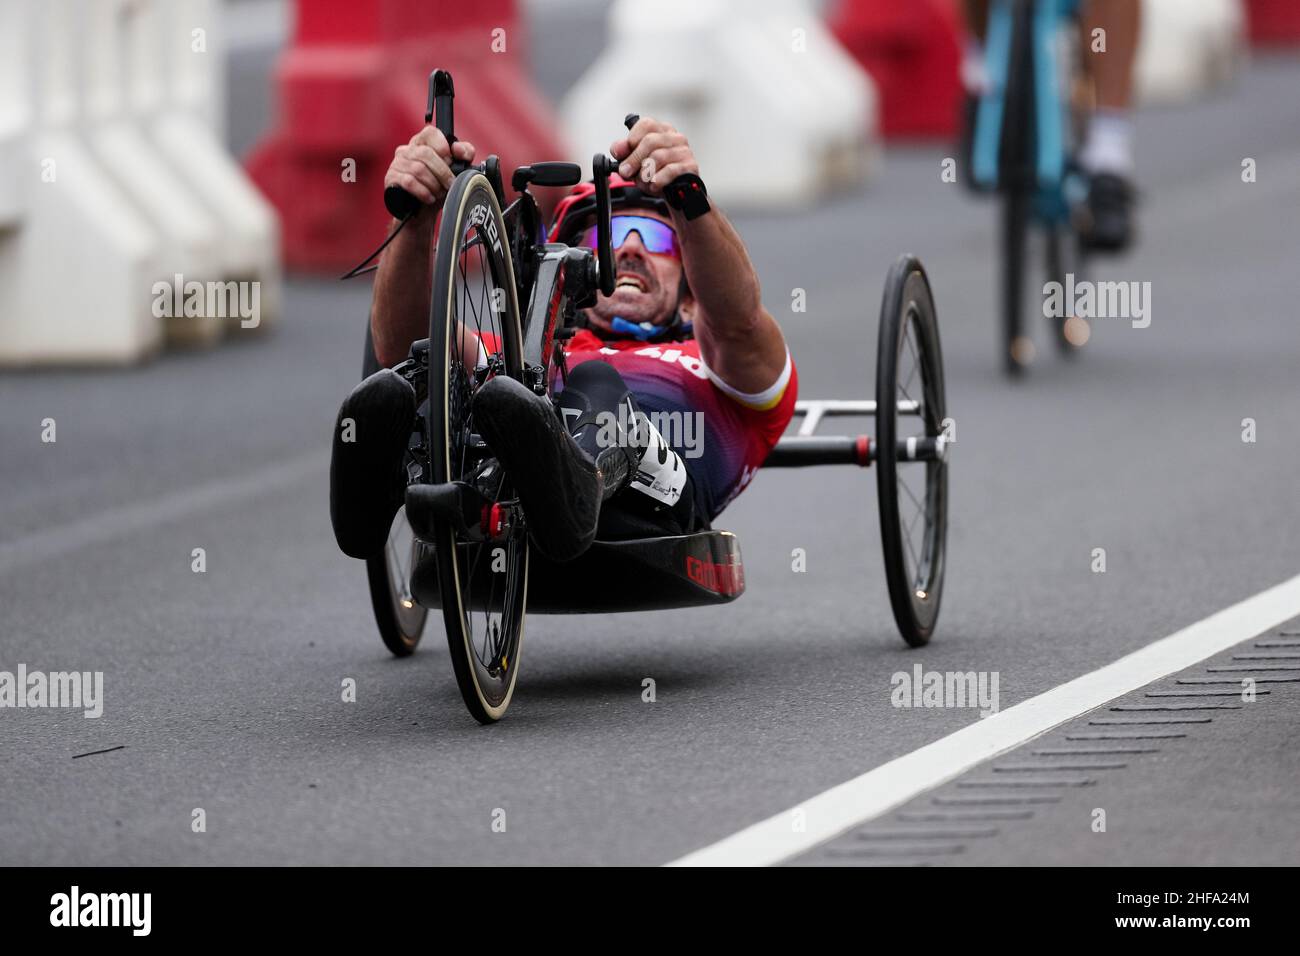 Ballarat, Australia, 15 January, 2022. Grant Allen rides during the Para-Cycling & Intellectually Impaired Road Race (Para MH4) as part of the Australian Road National Championships on January 15, 2022 in Ballarat, Australia. Credit: Brett Keating/Speed Media/Alamy Live News Stock Photo